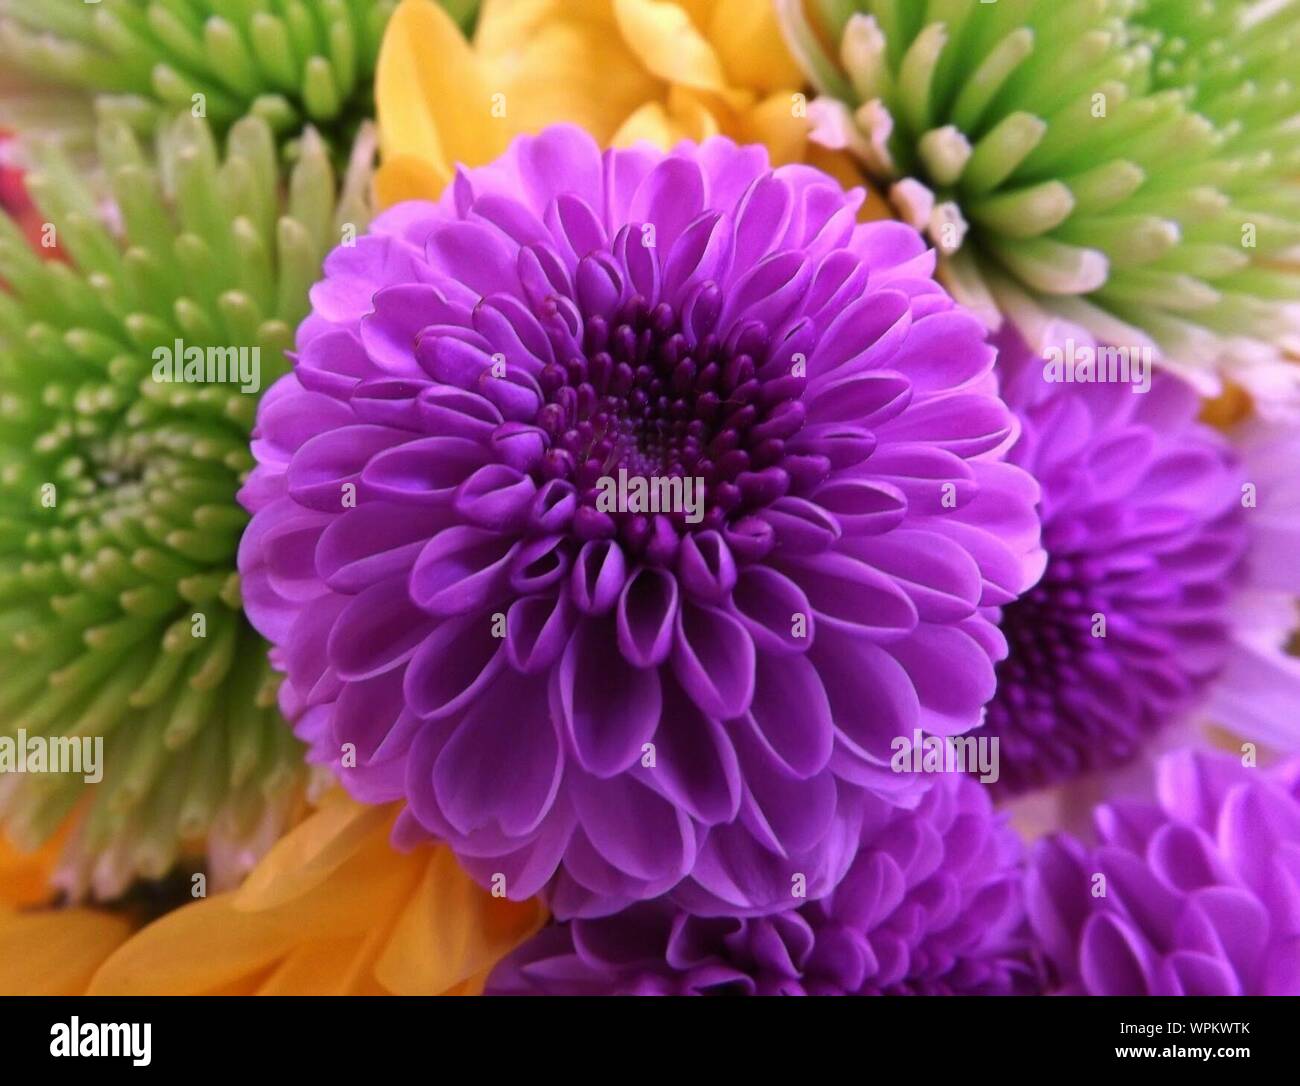 Flower With Purple Petals Stock Photo